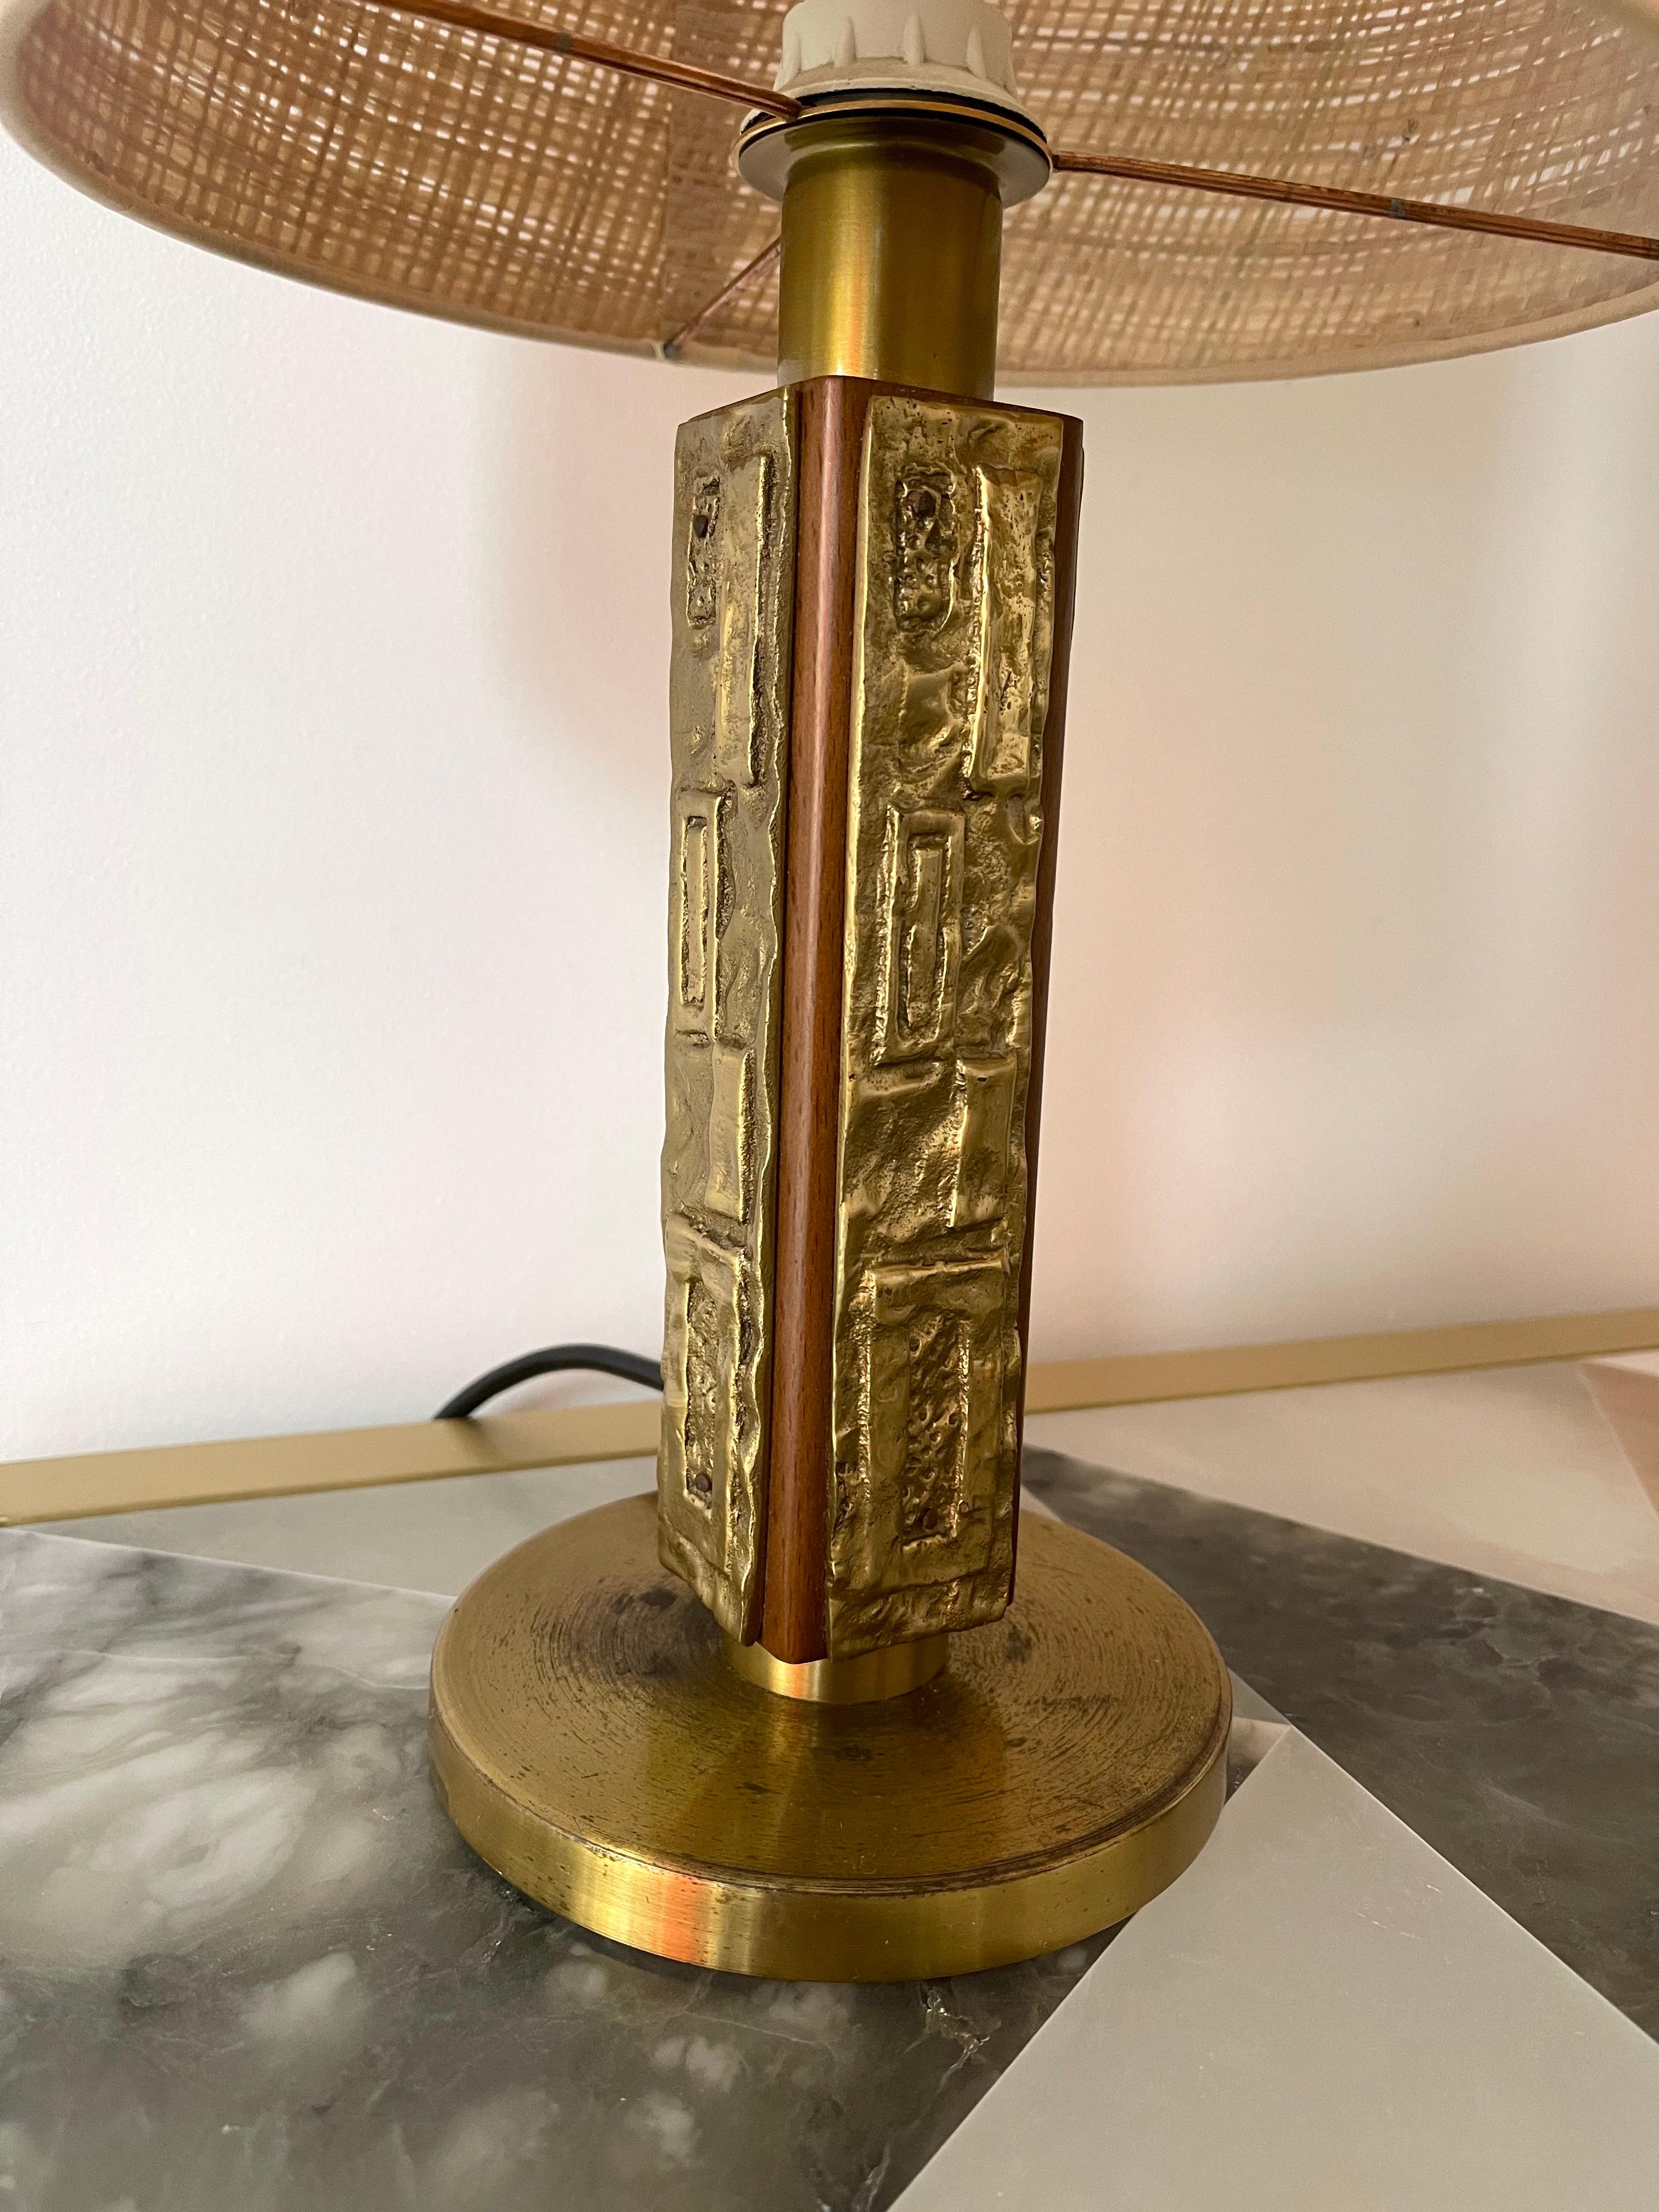 Italian Pair of Brass and Wood Sculpture Lamps by Angelo Brotto for Esperia Italy, 1970s For Sale